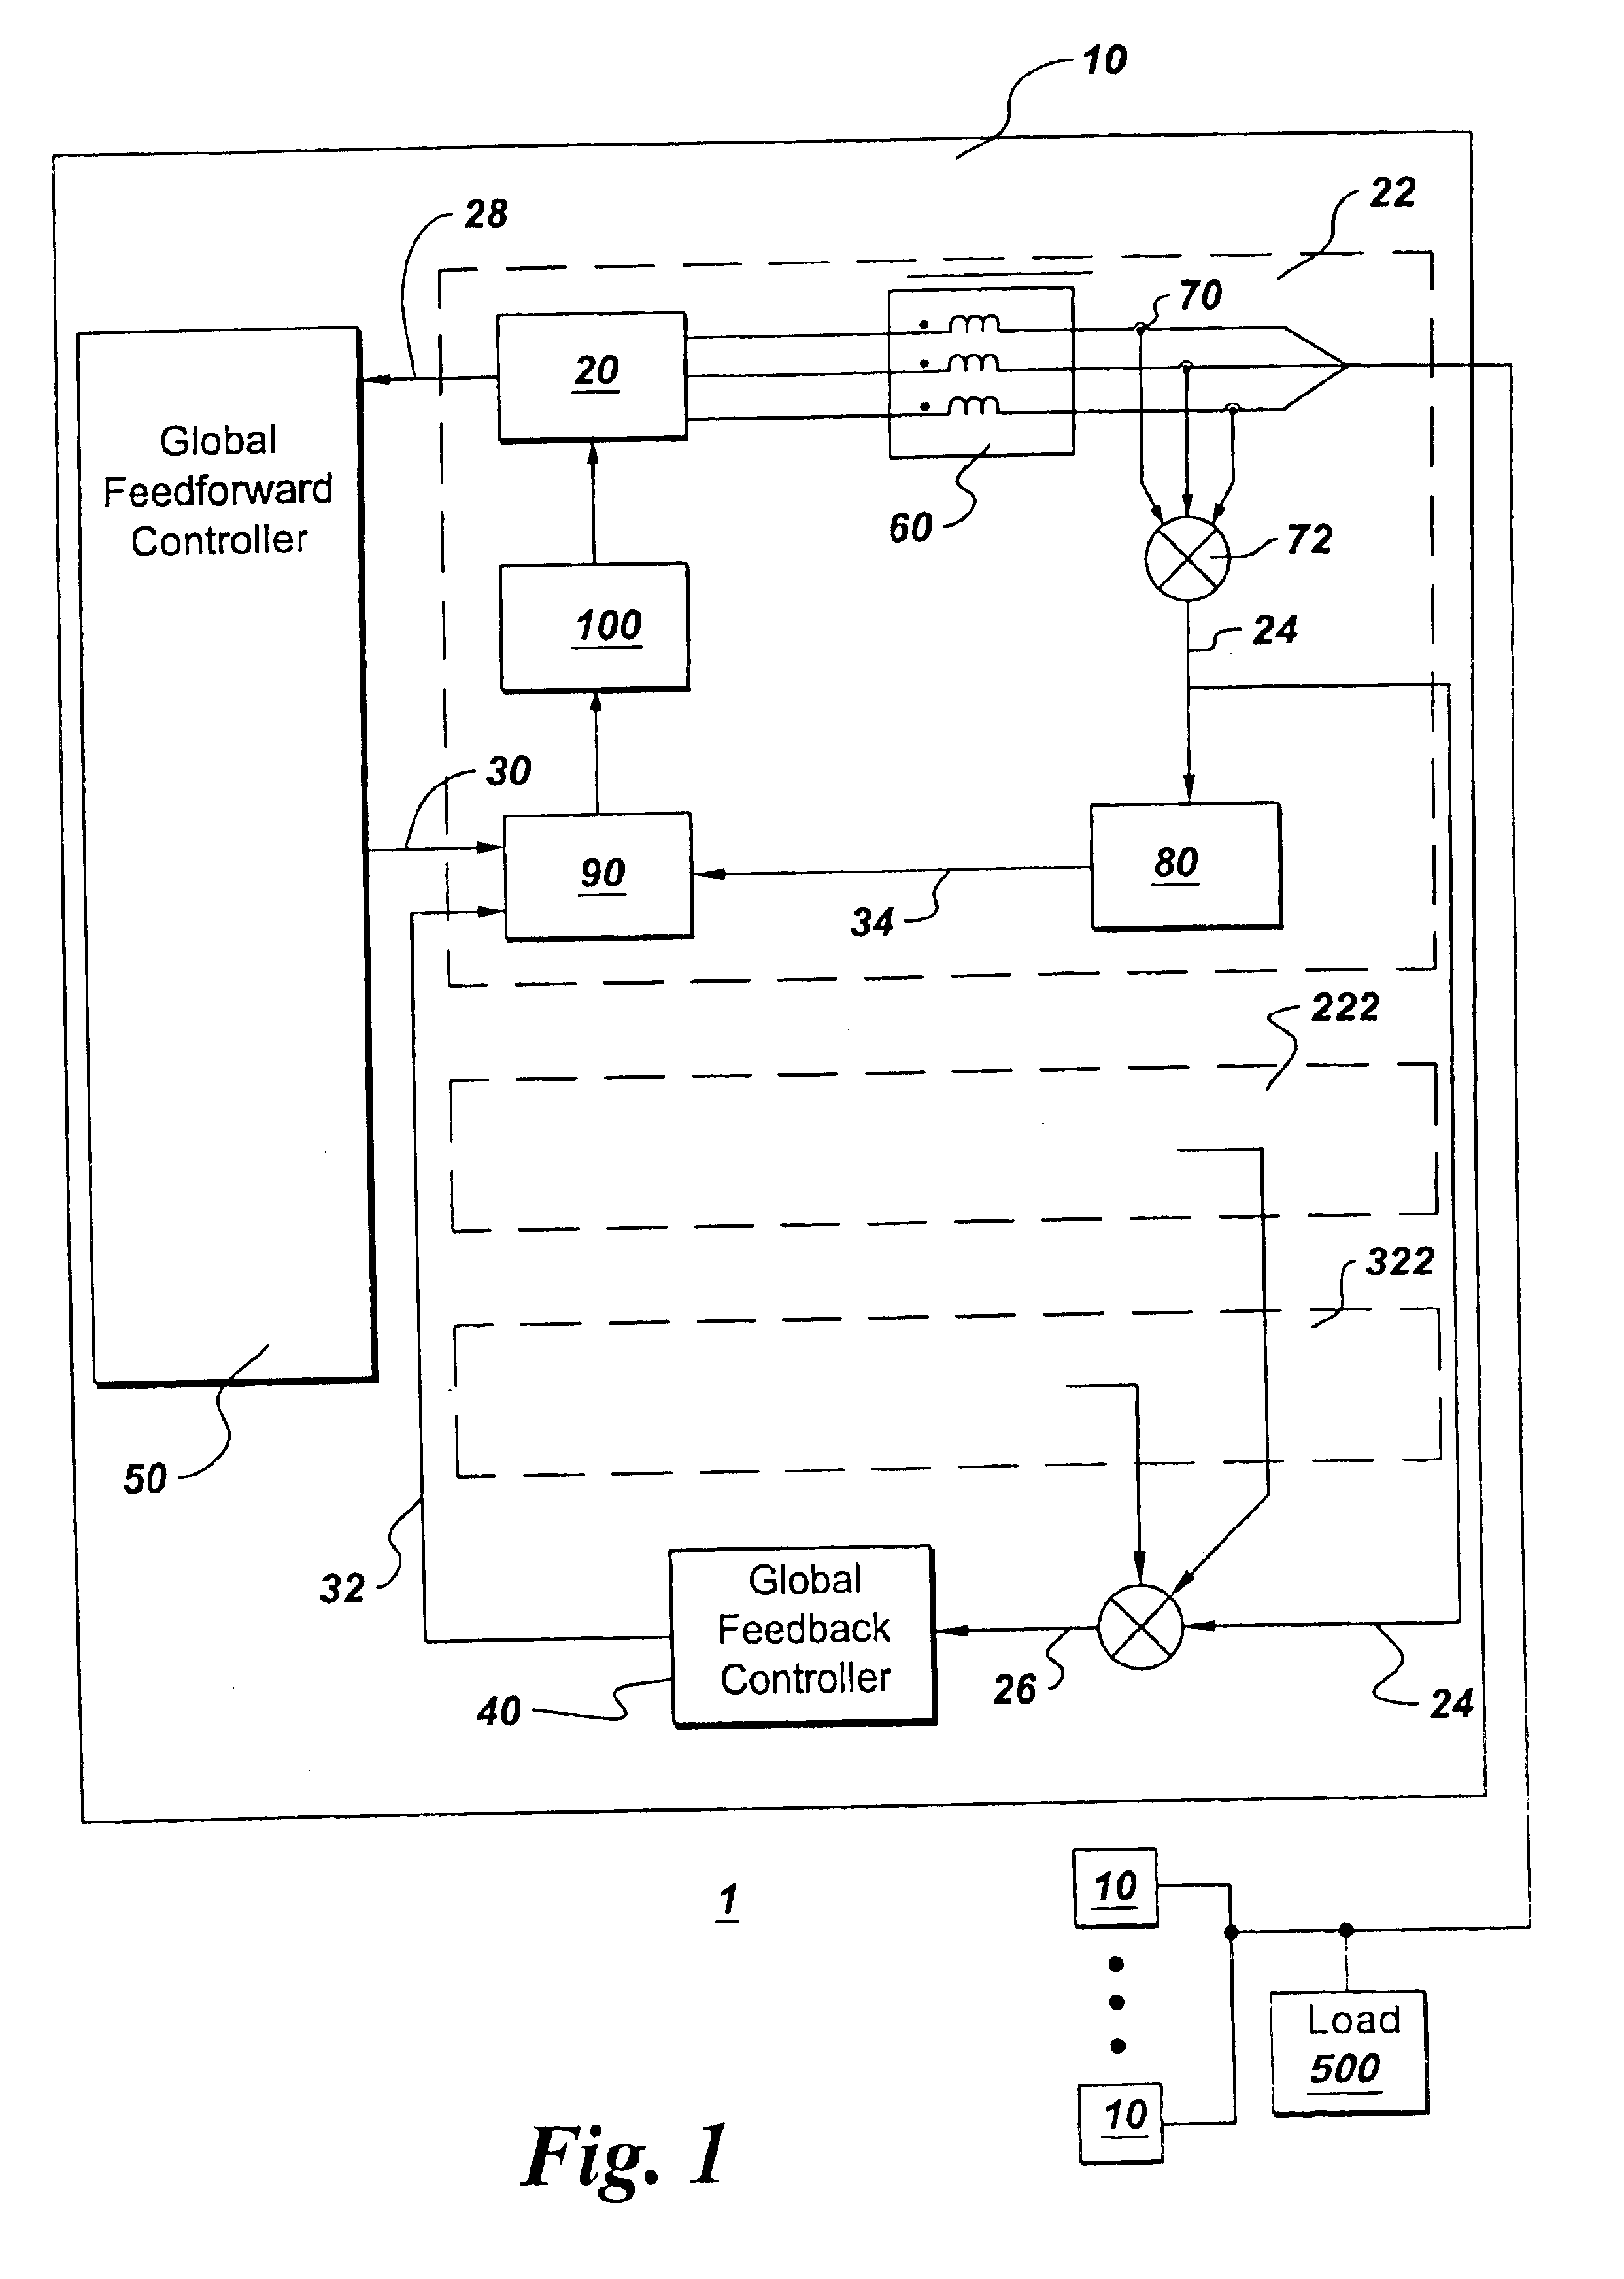 Cross current control for power converter systems and integrated magnetic choke assembly